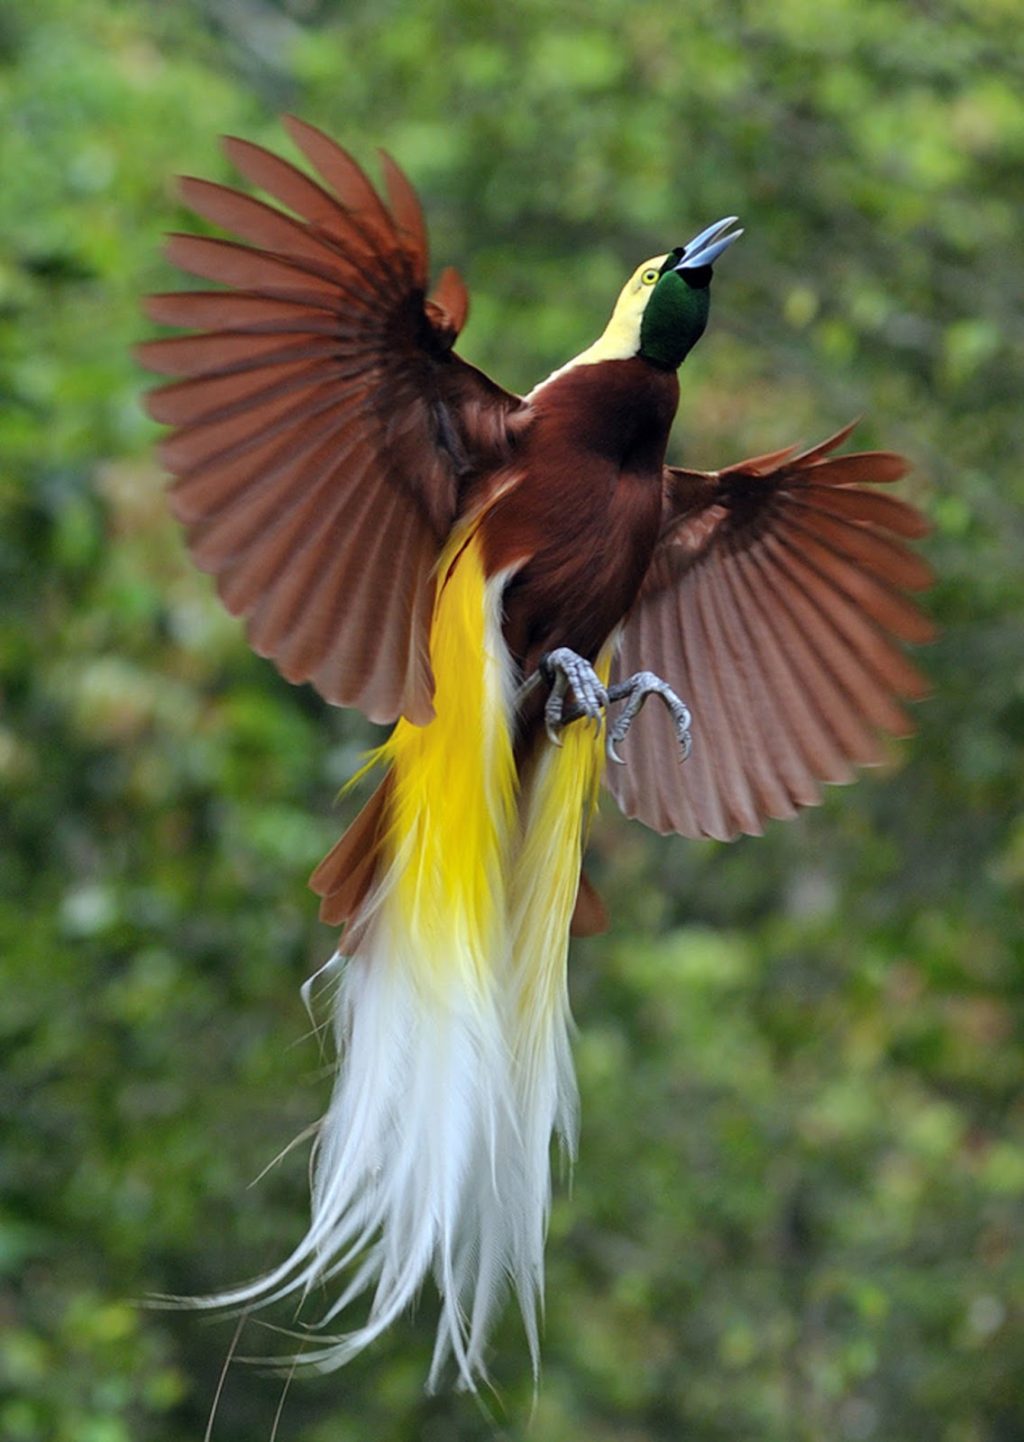 Greater bird of paradise 3 Top 20 Most Beautiful Colorful Birds in The World - 68